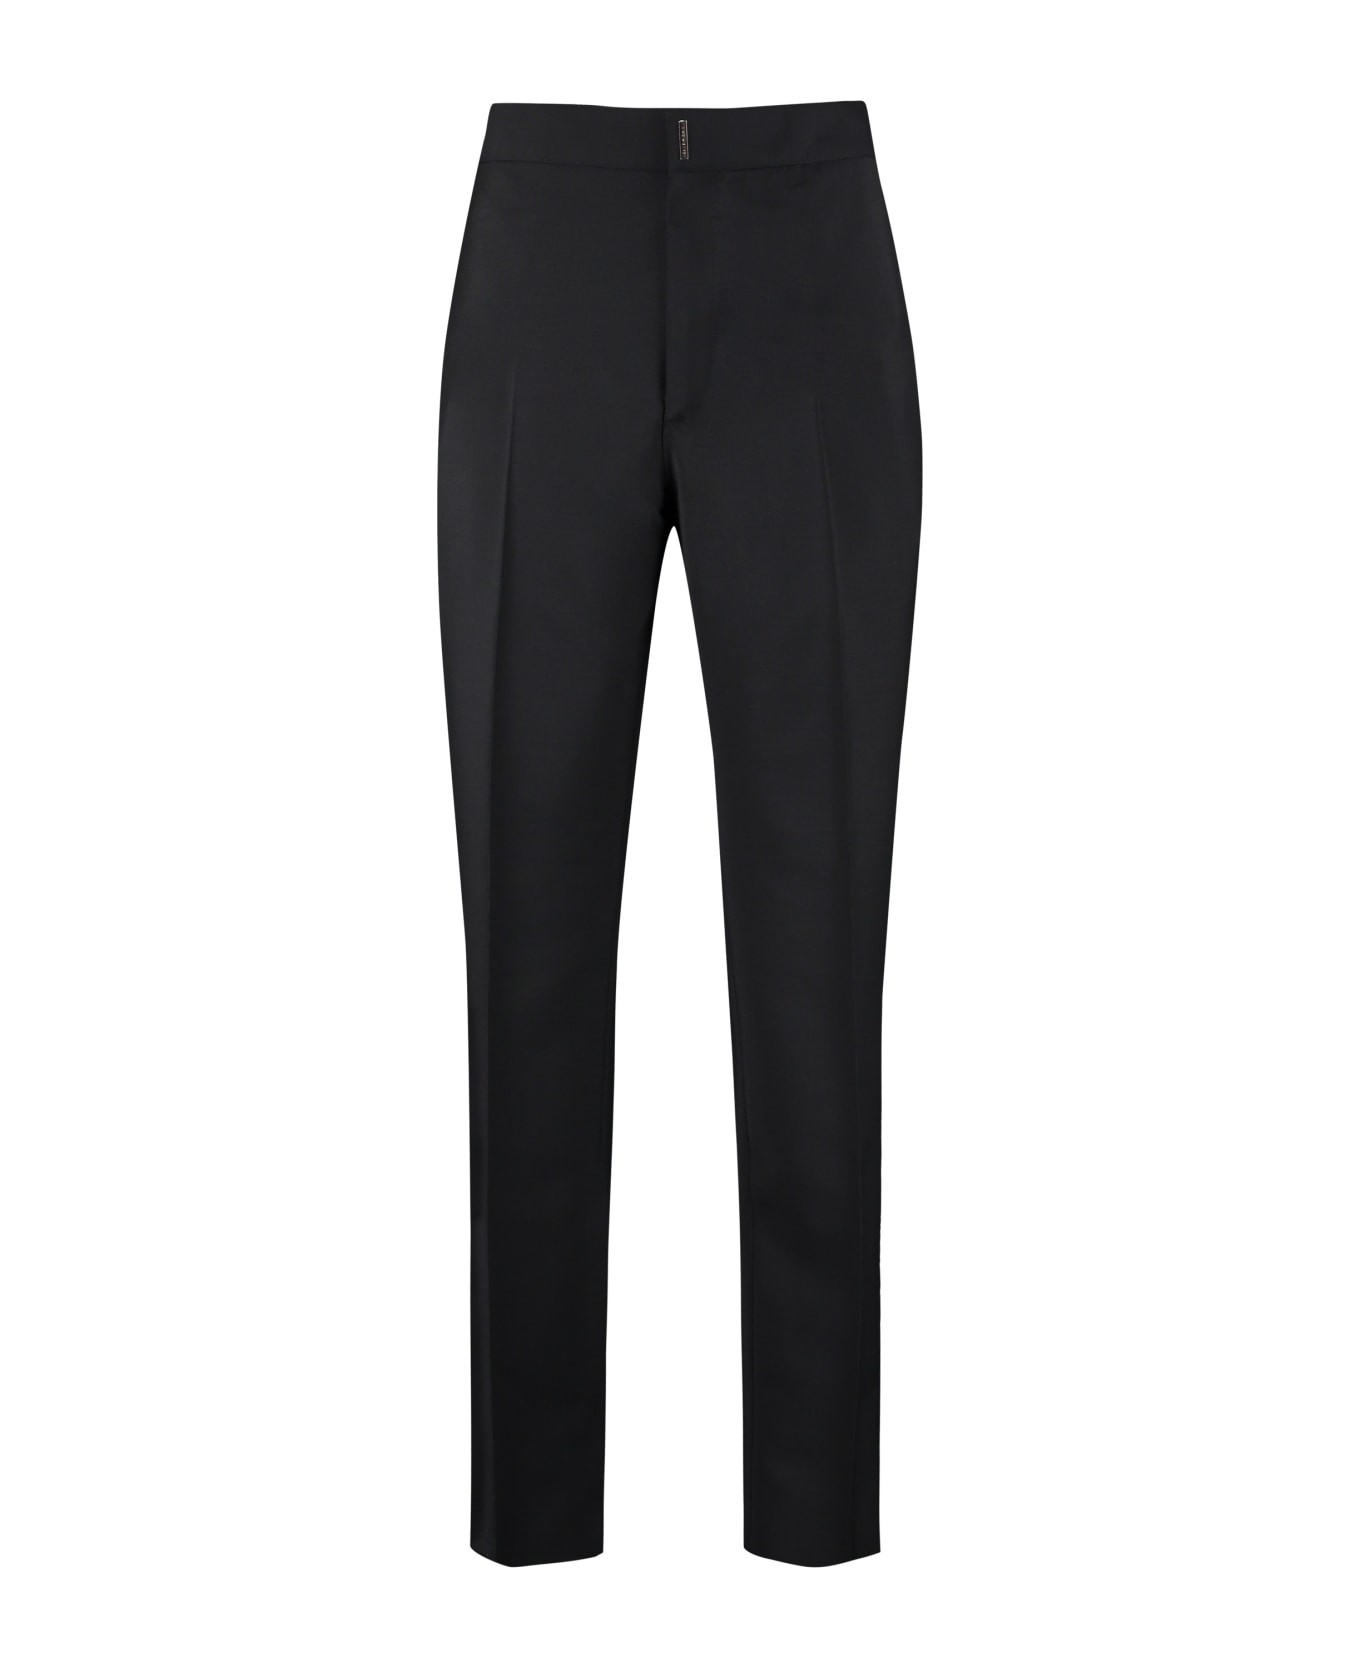 Givenchy Tailored Wool Trousers - BLACK